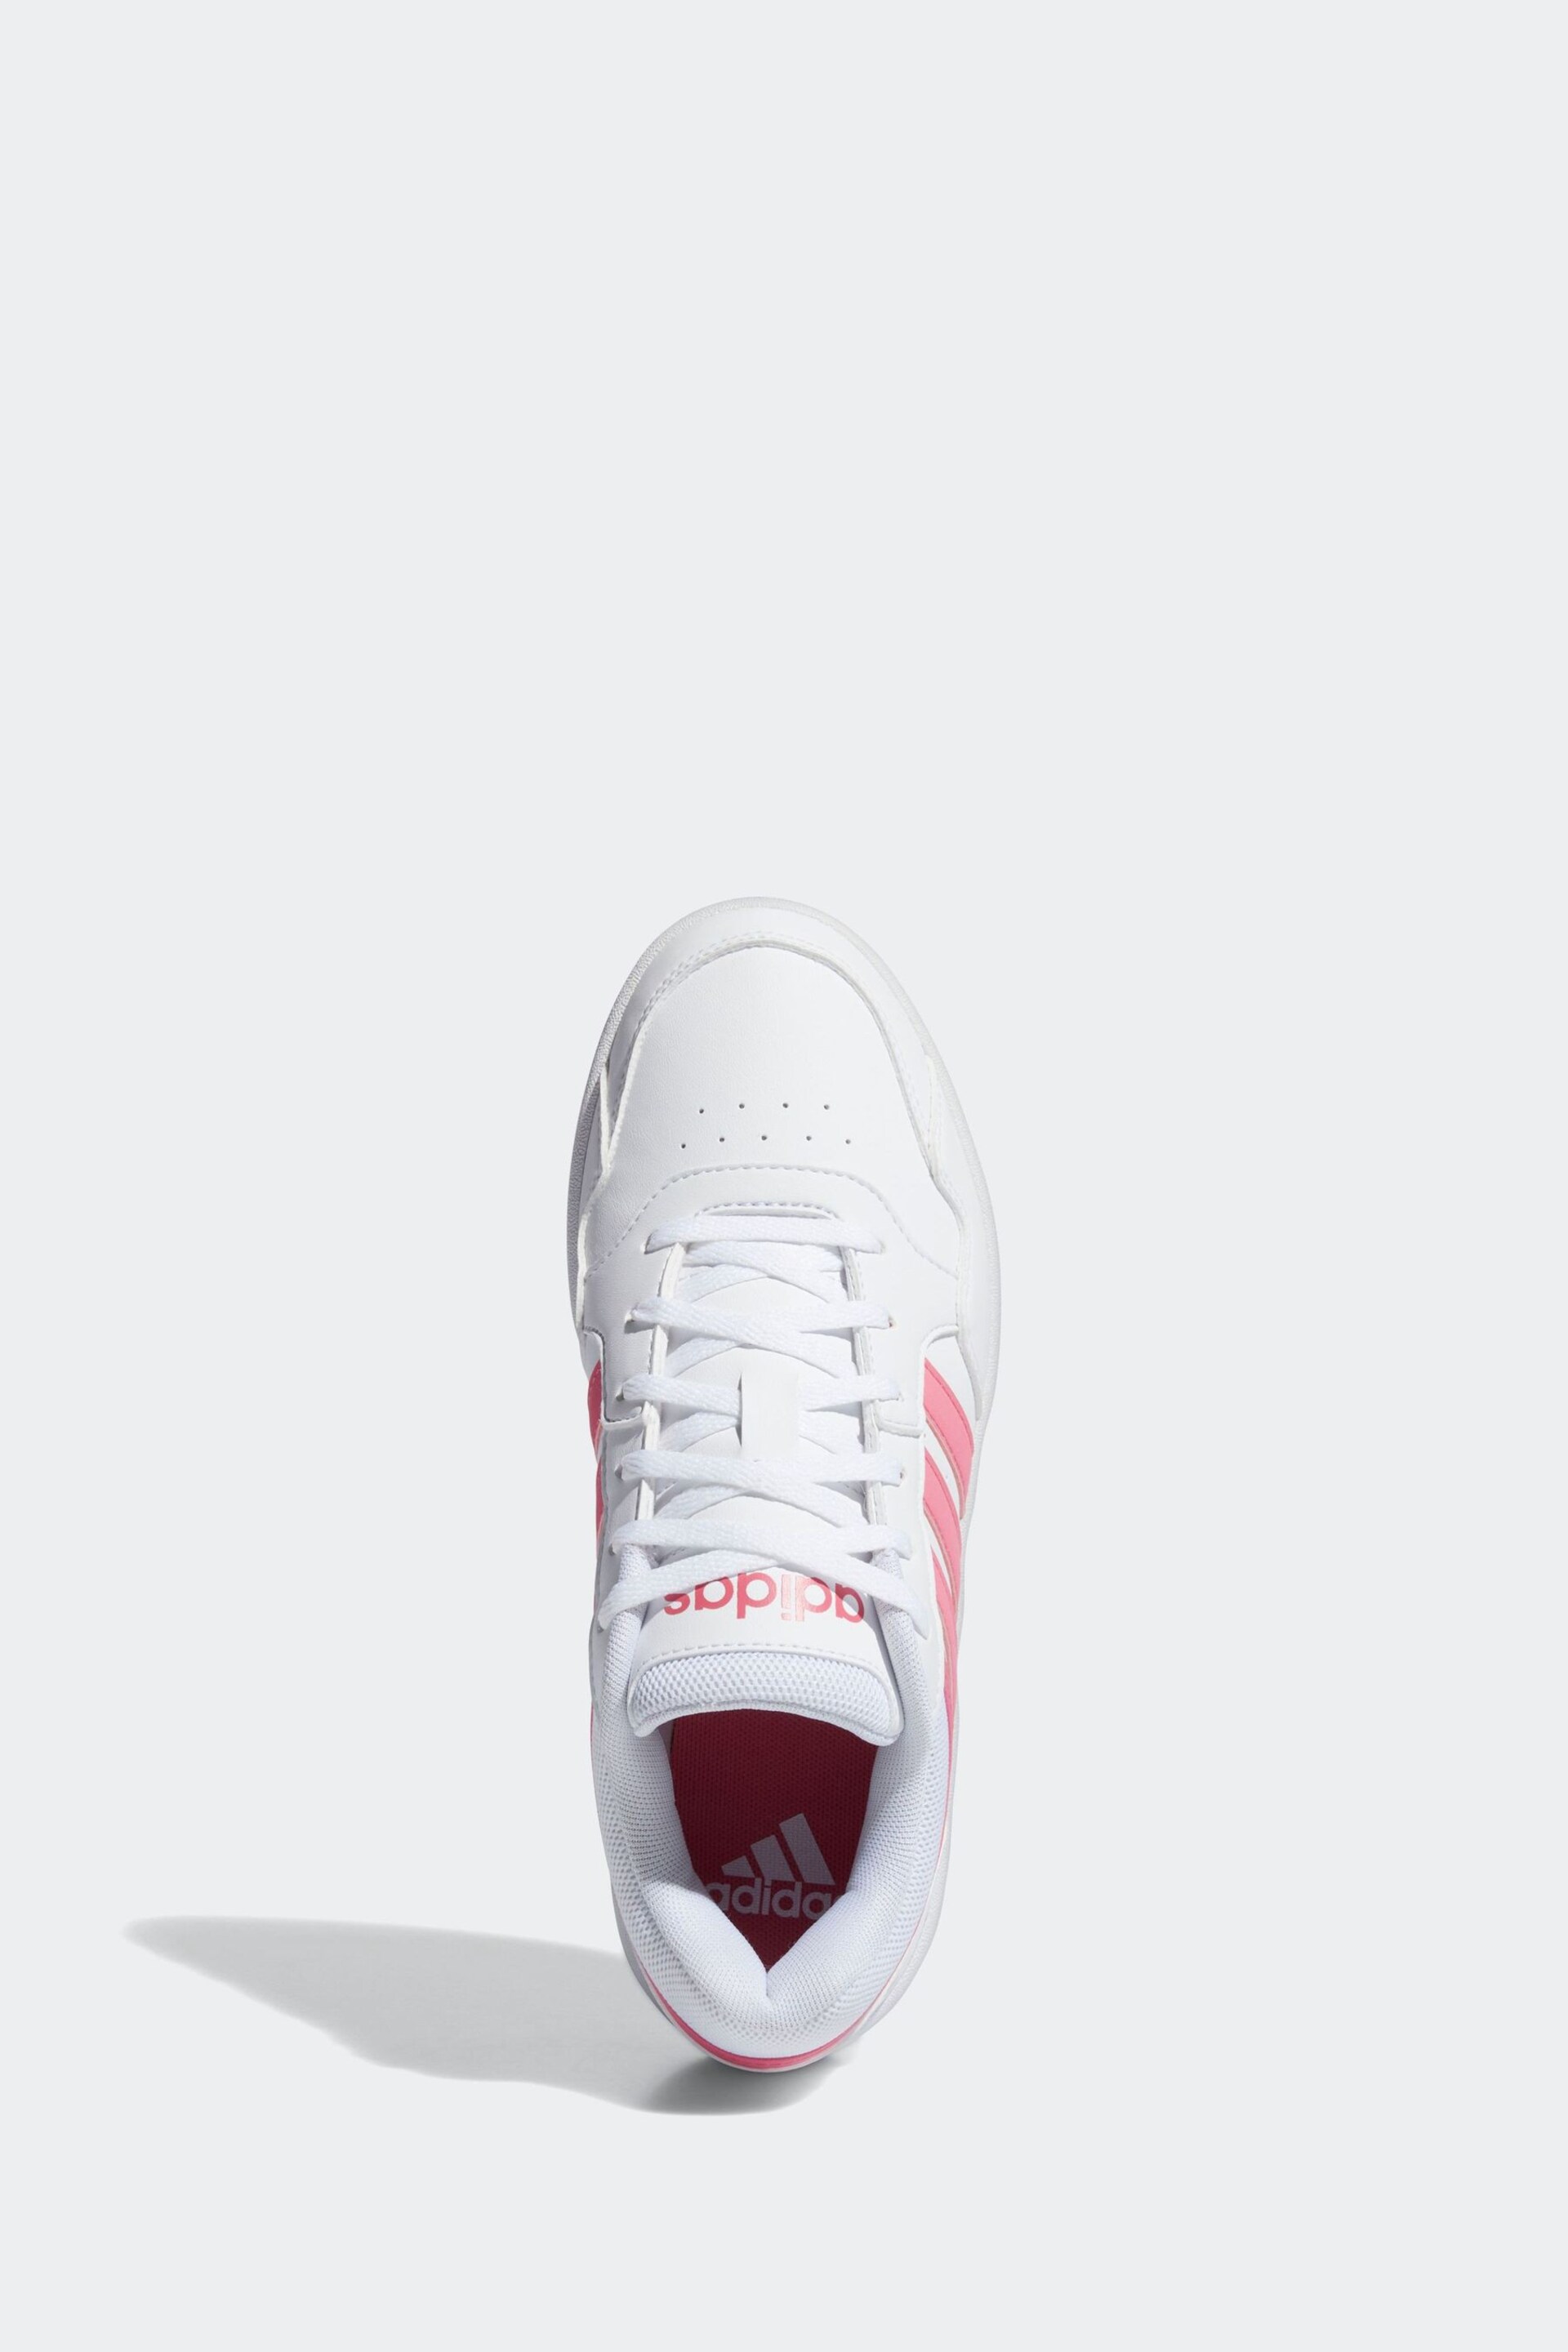 adidas Originals White/Pink Hoops 3.0 Bold Trainers - Image 4 of 9